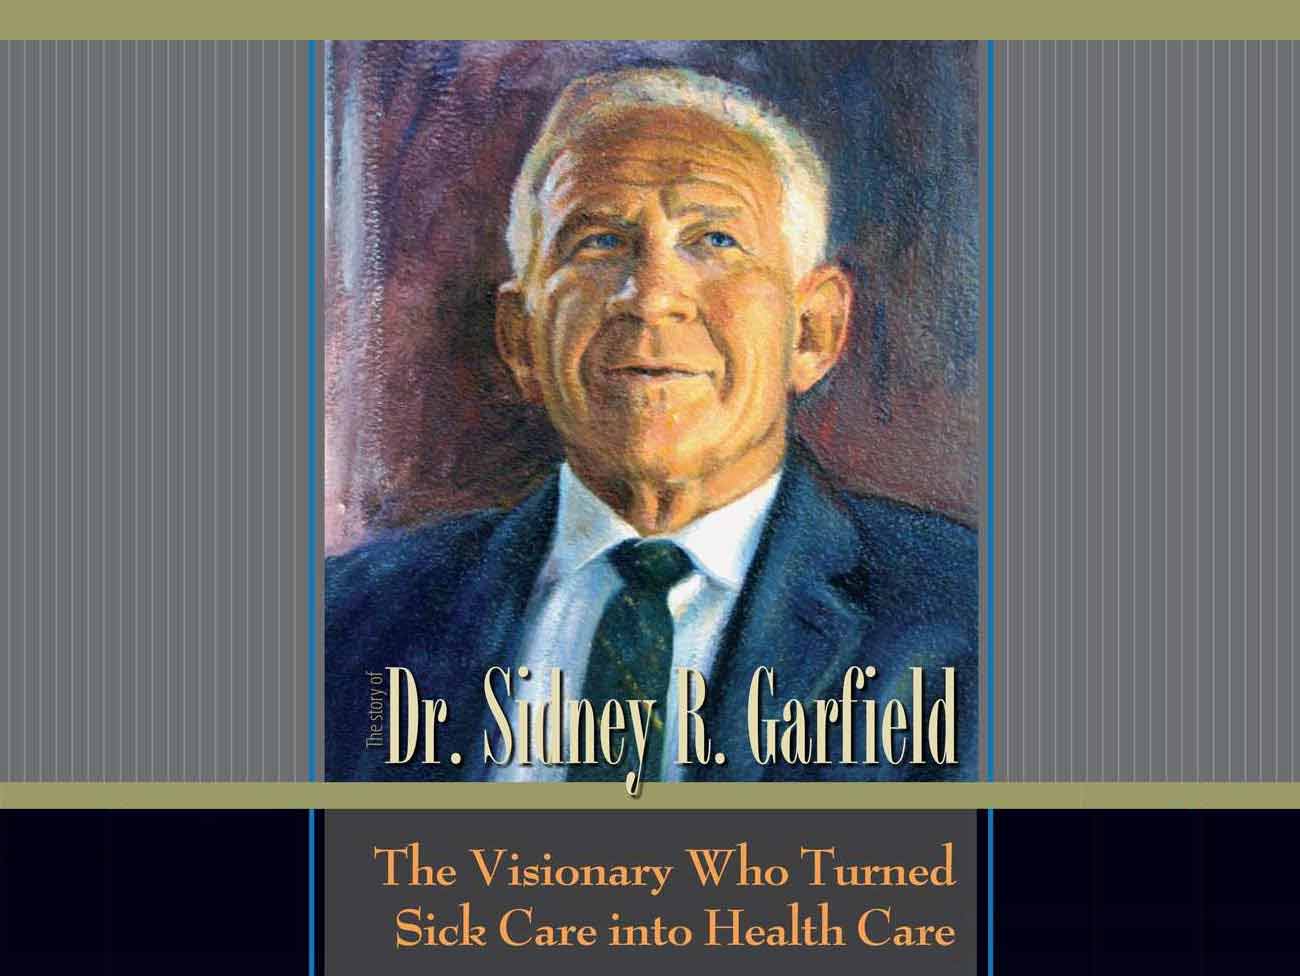 Book cover: 'The Story of Dr. Sidney R. Garfield — The Visionary Who Turned Sick Care into Health Care' with color illustration of Dr. Garfield.